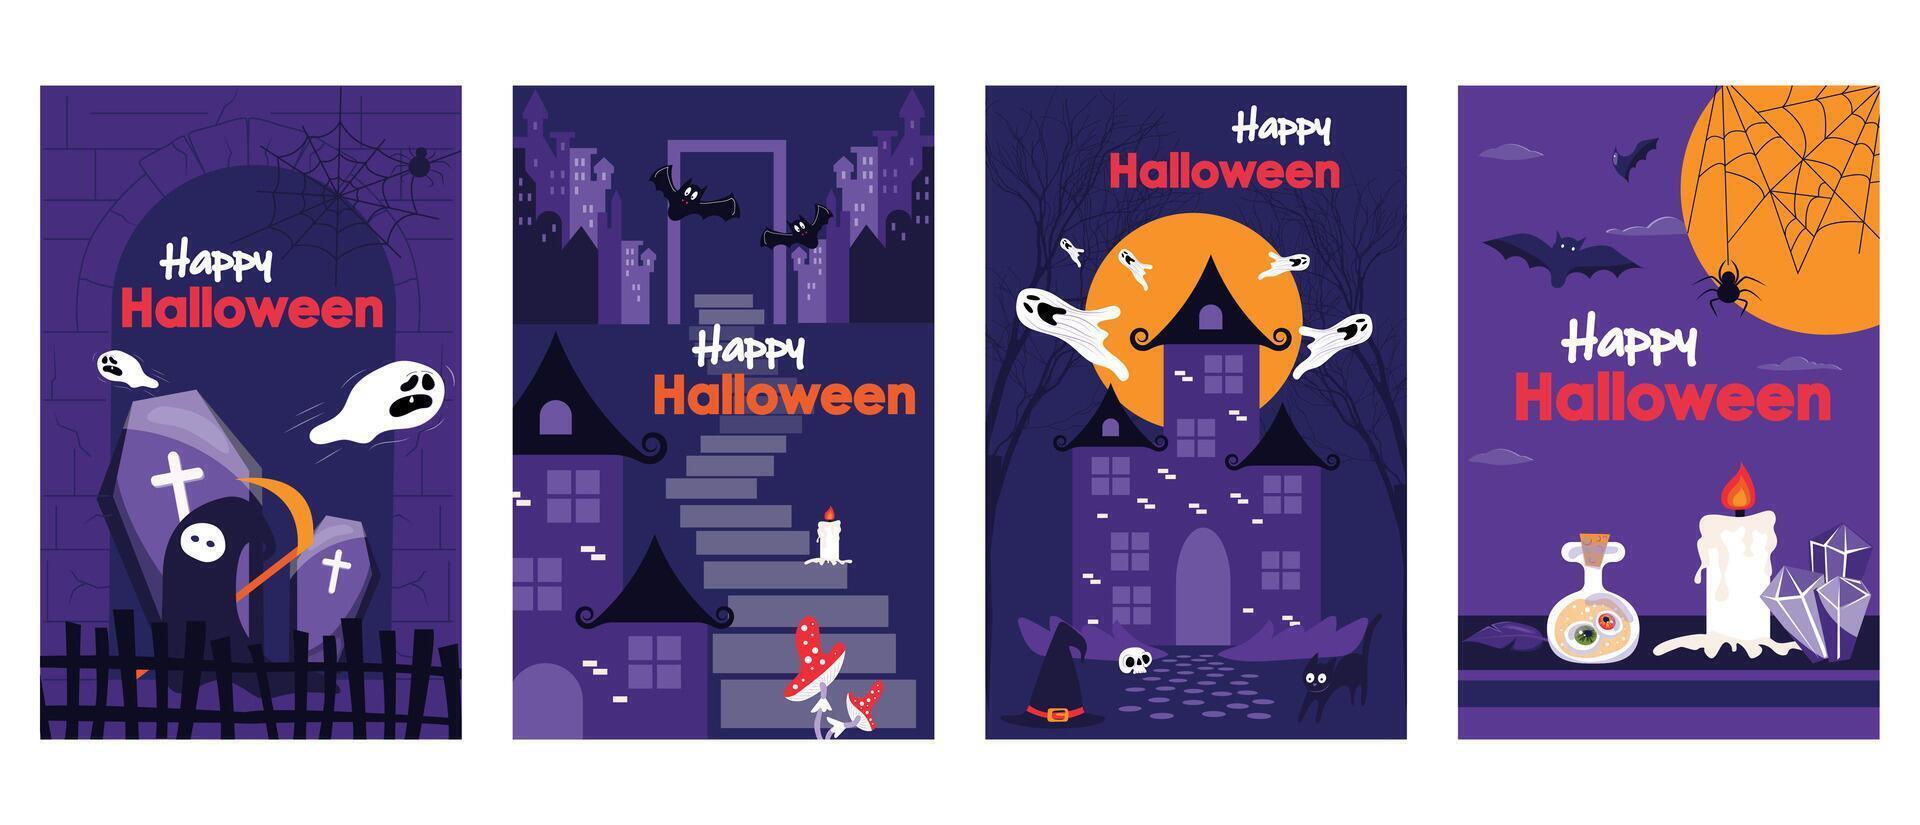 Halloween holiday cover brochure set in trendy flat design. Poster templates with spooky death character, flying ghosts, old castle and house with moon, creepy potion and candles. Vector illustration.